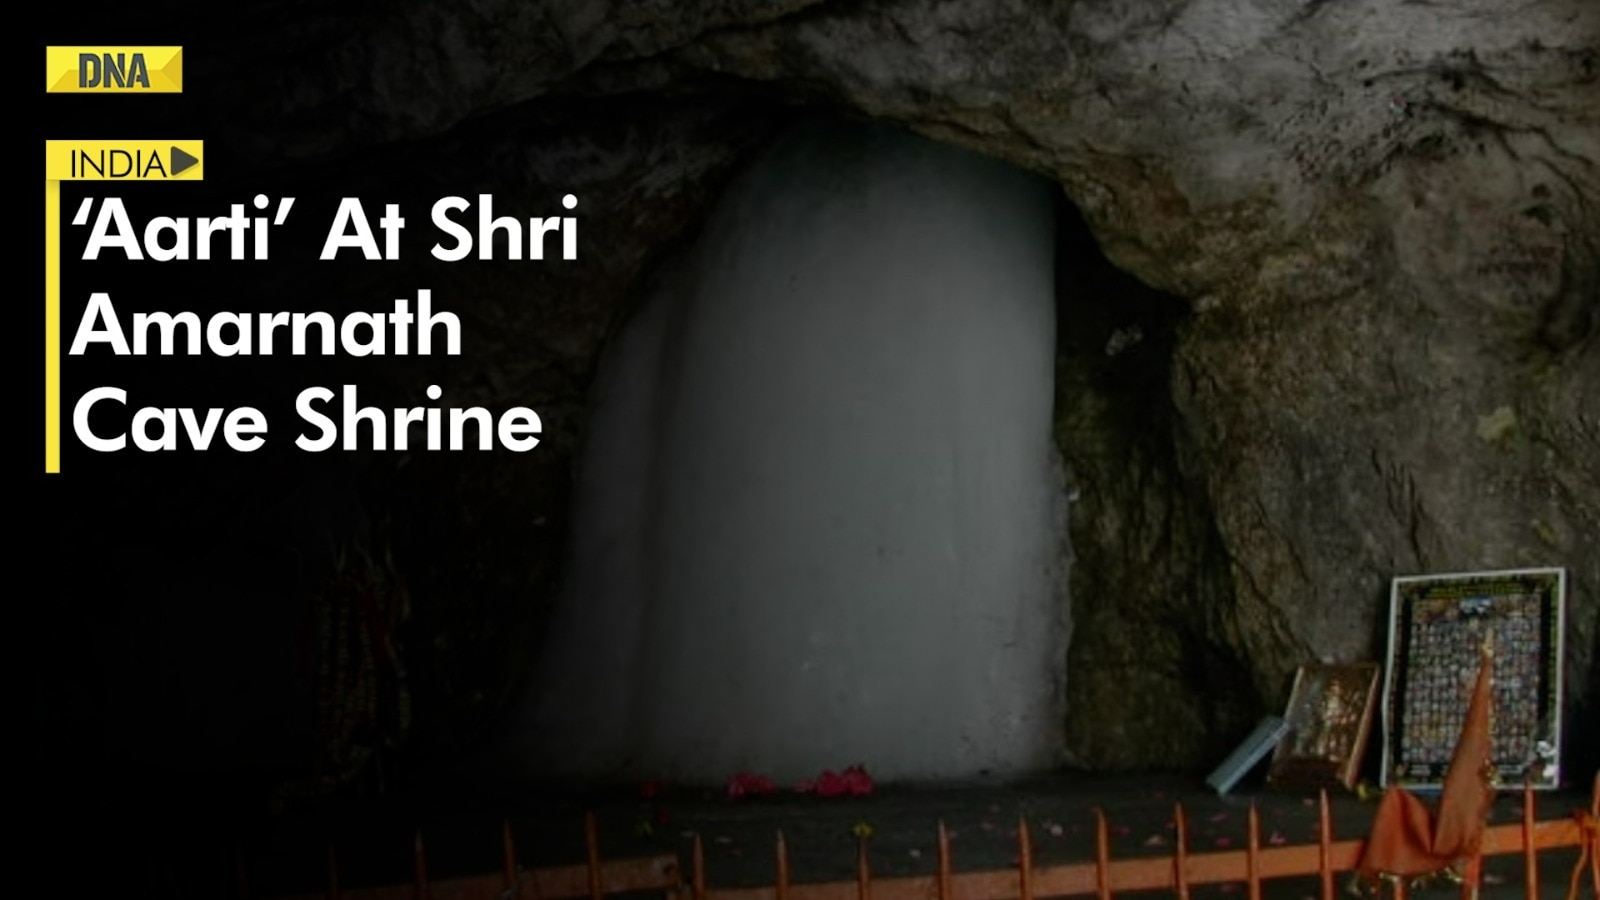 History Of Amarnath Temple, Top 5 Best Photos, Opening Date